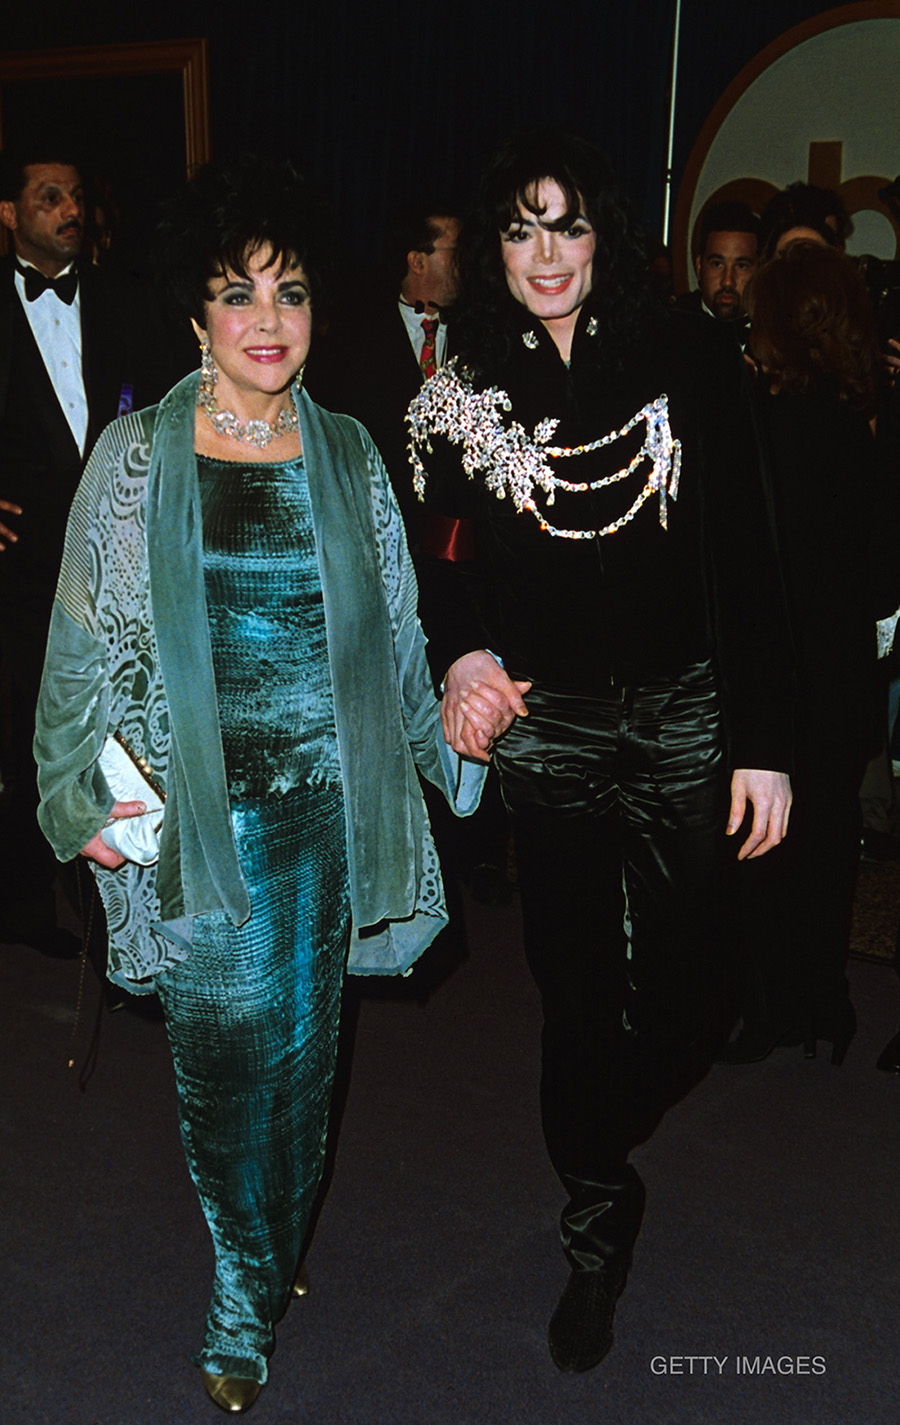 Michael Jackson and Elizabeth Taylor attend the special, "Happy Birthday Elizabeth - A Celebration of Life," which marked her 65th birthday and raised money for AIDS research, on February 16, 1997.